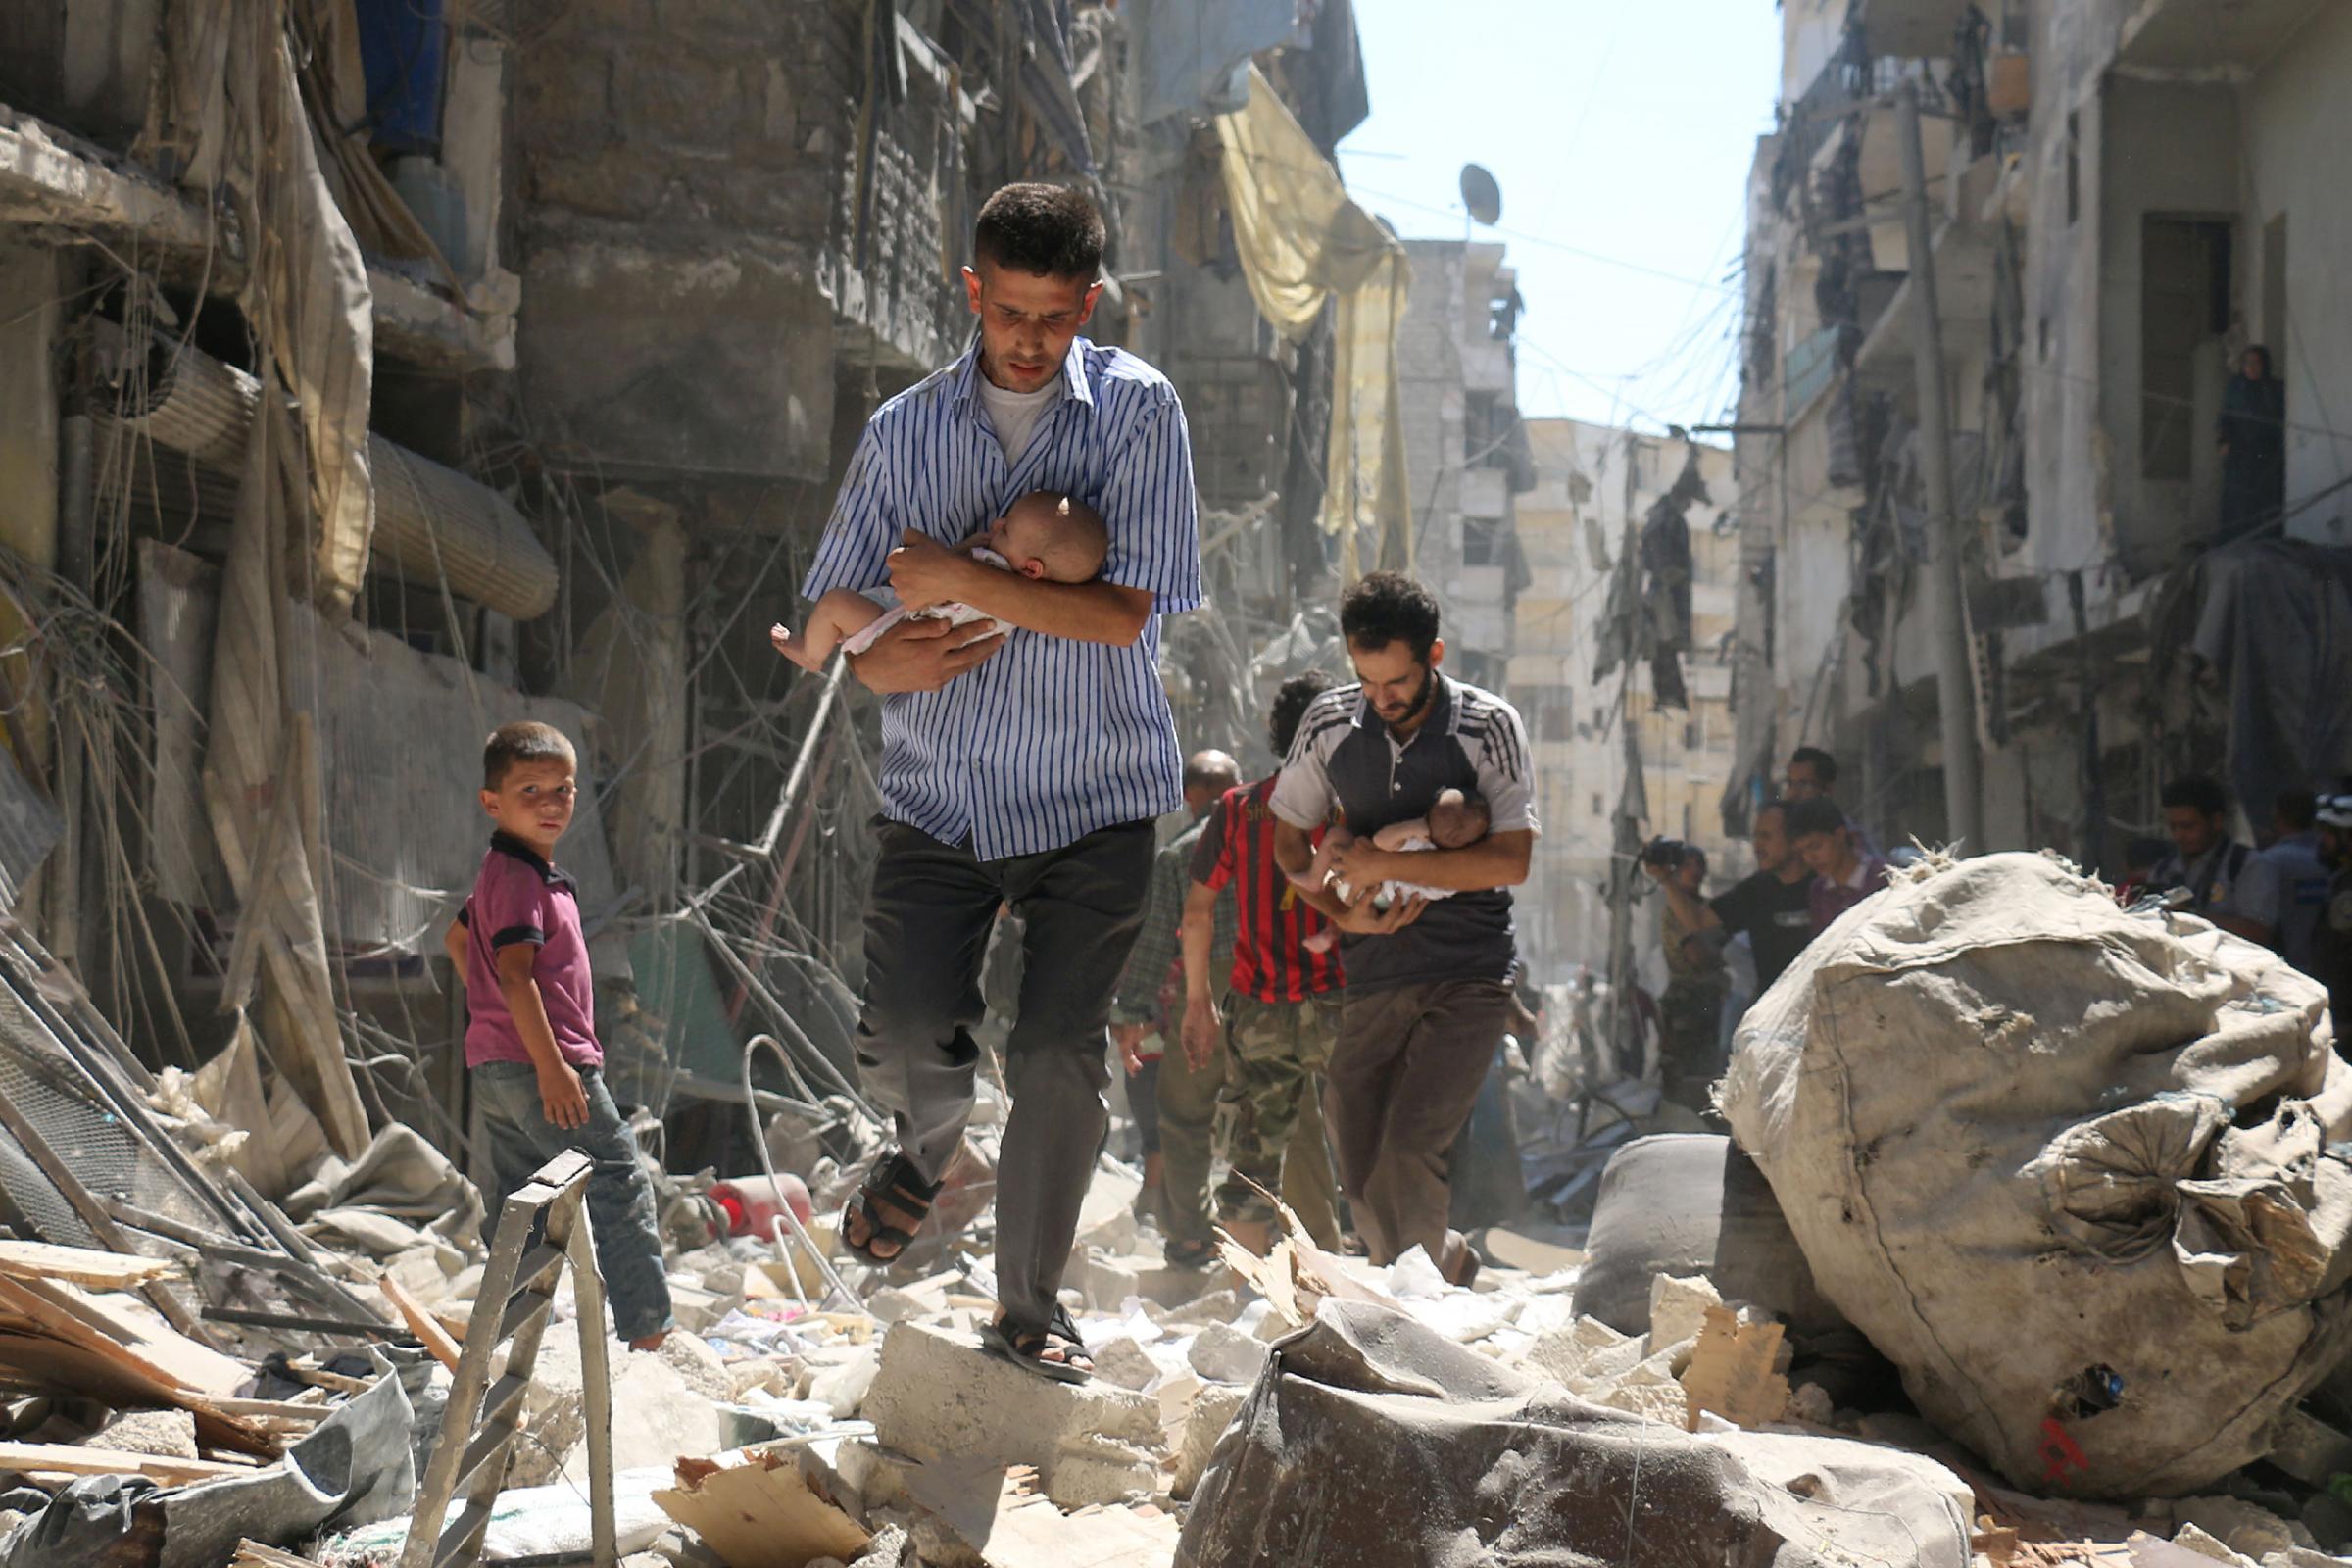 Syrian men carrying babies make their way through the rubble of destroyed buildings following a reported airstrike on the rebel-held Salihin neighborhood of Aleppo on Sept. 11, 2016.